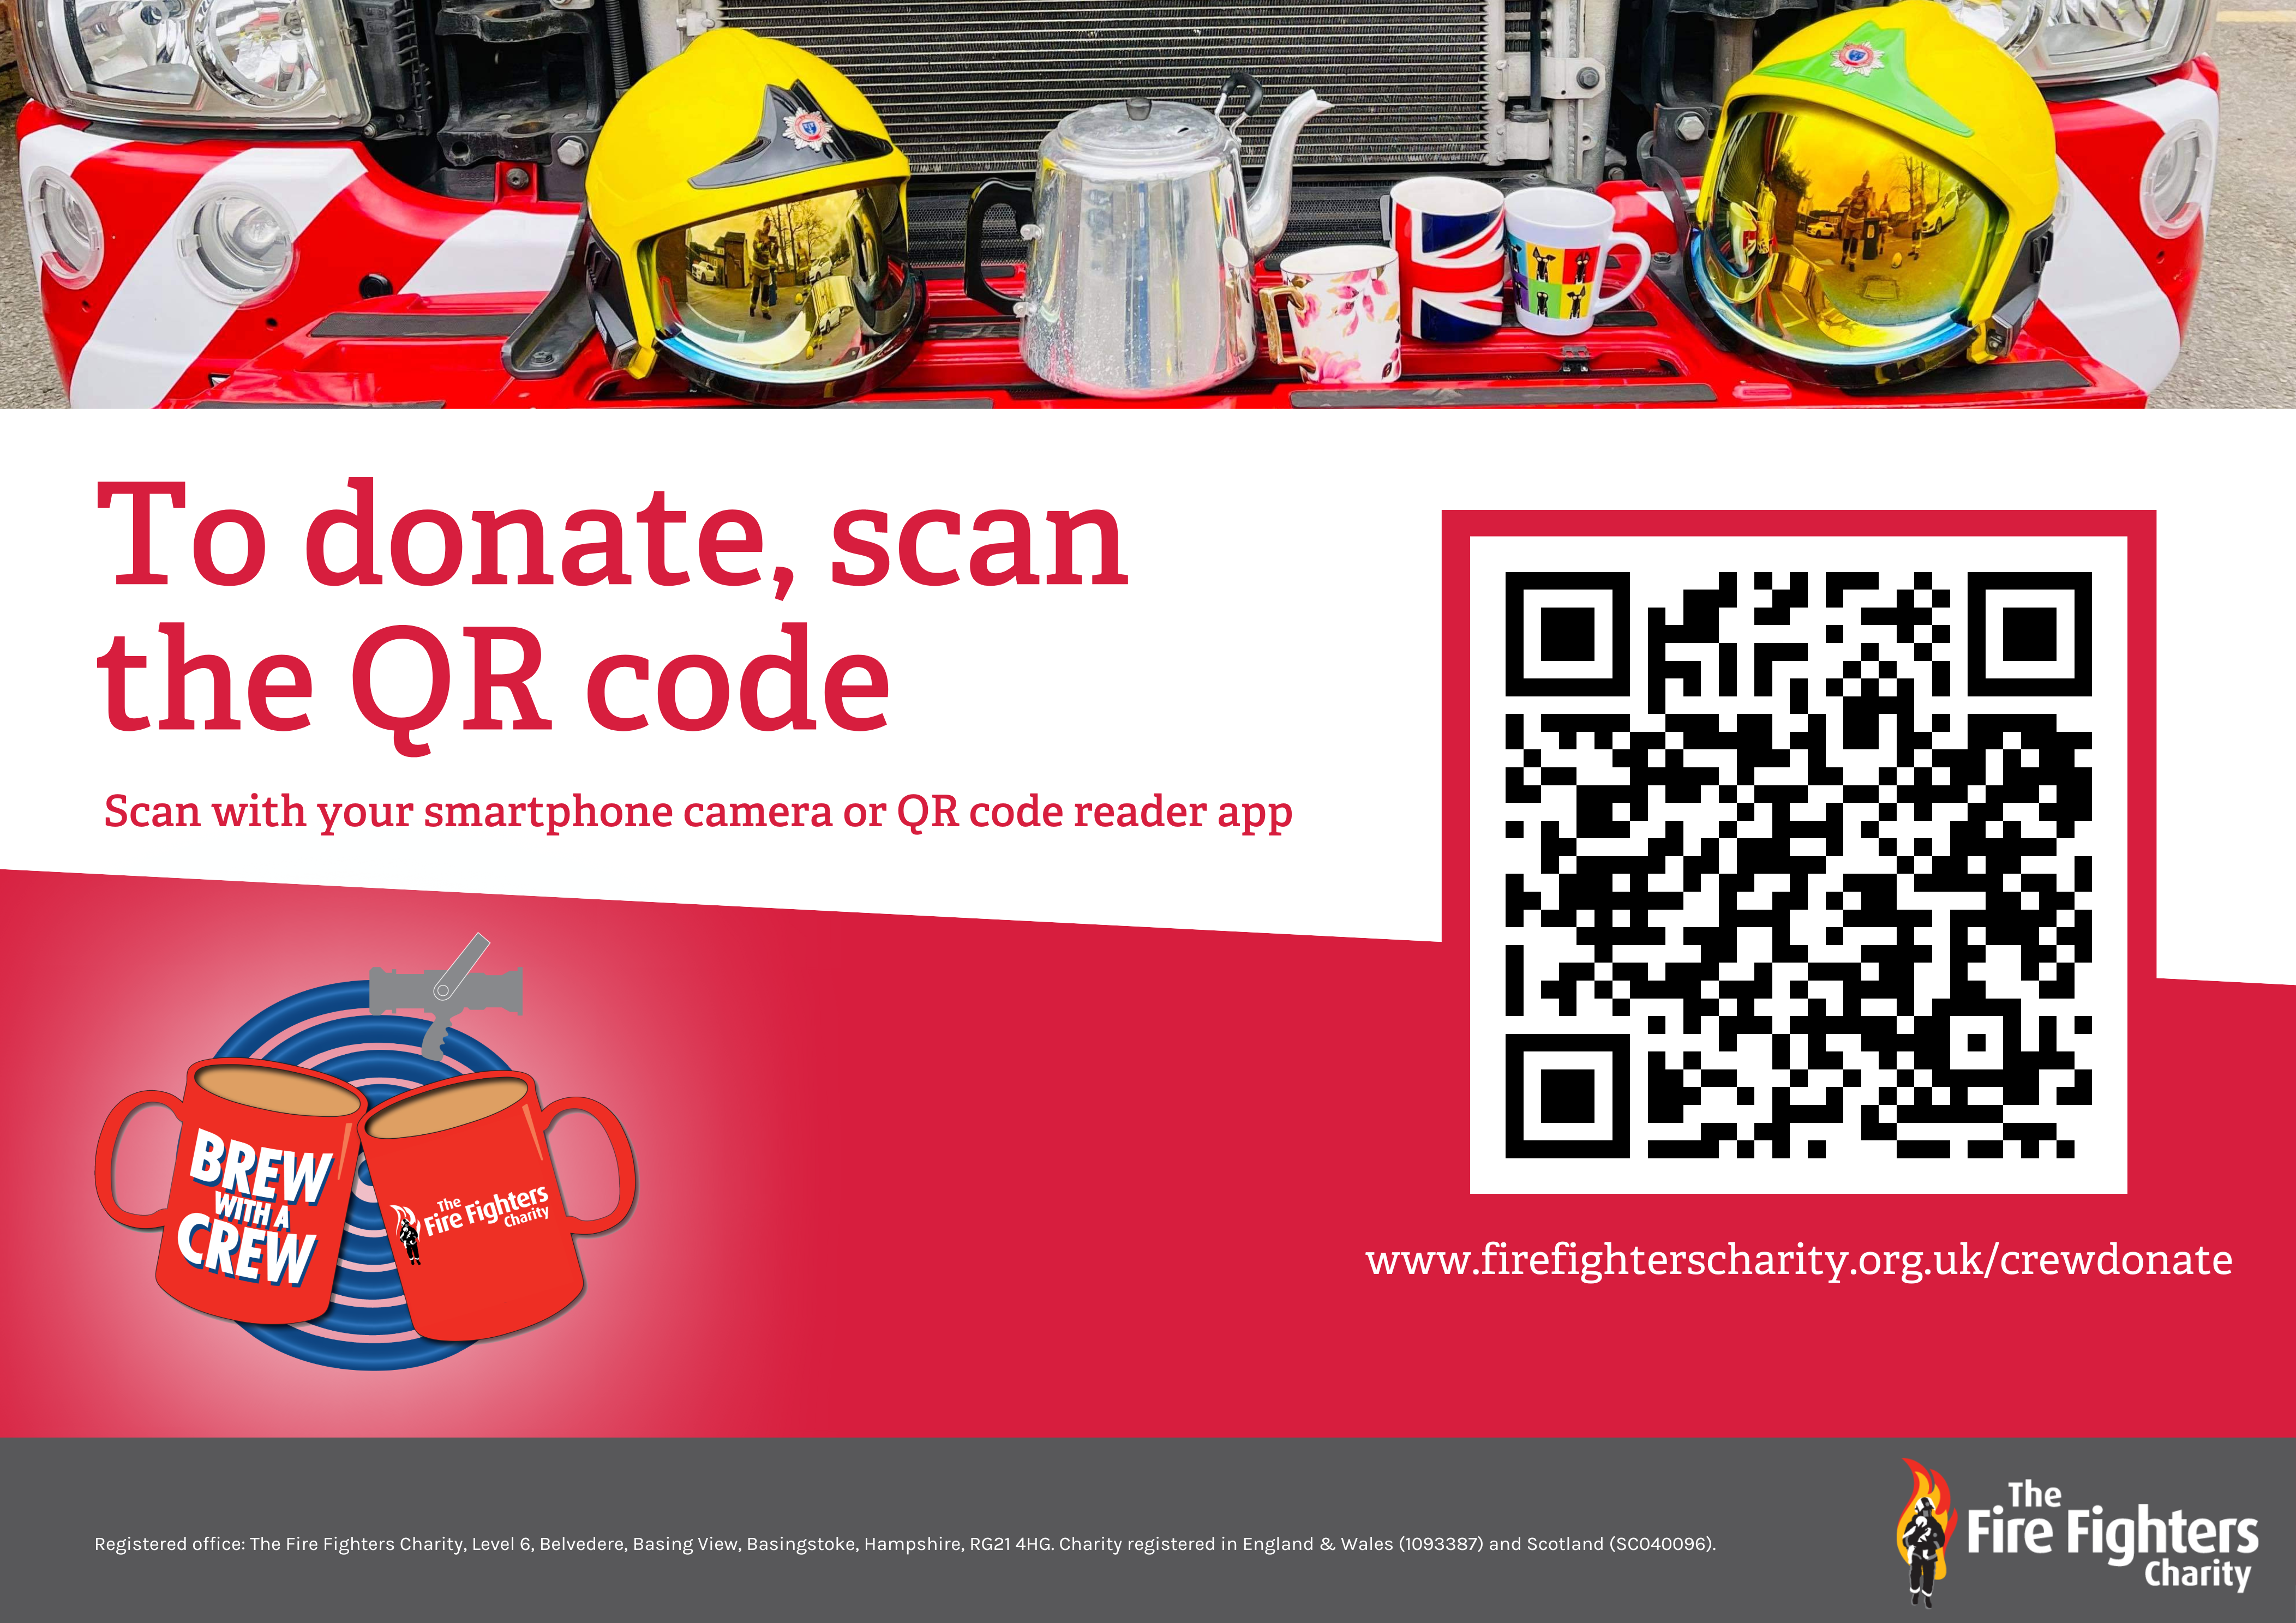 How can I use a QR Code to collect charity donations?